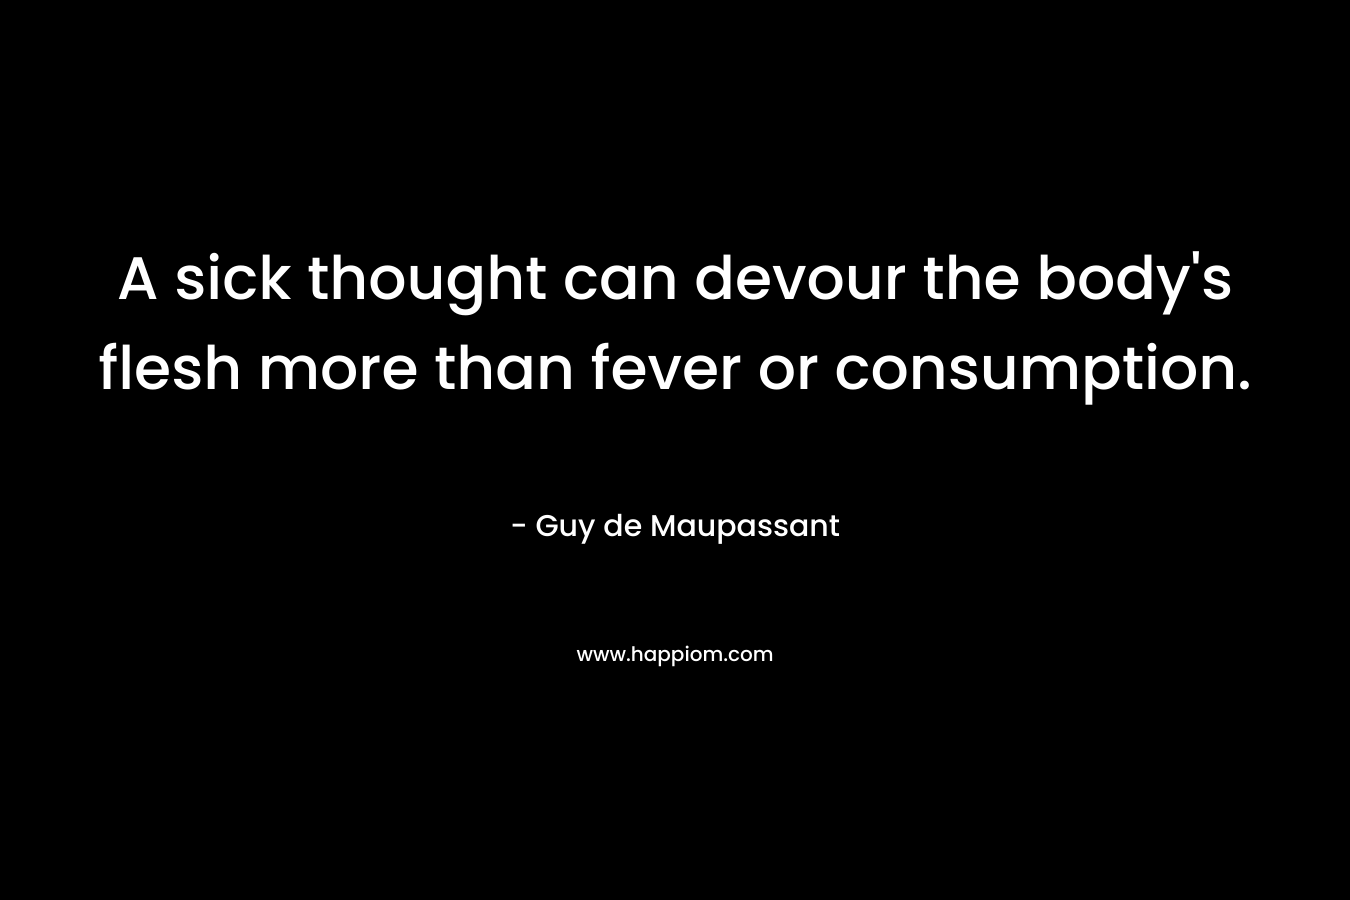 A sick thought can devour the body’s flesh more than fever or consumption. – Guy de Maupassant